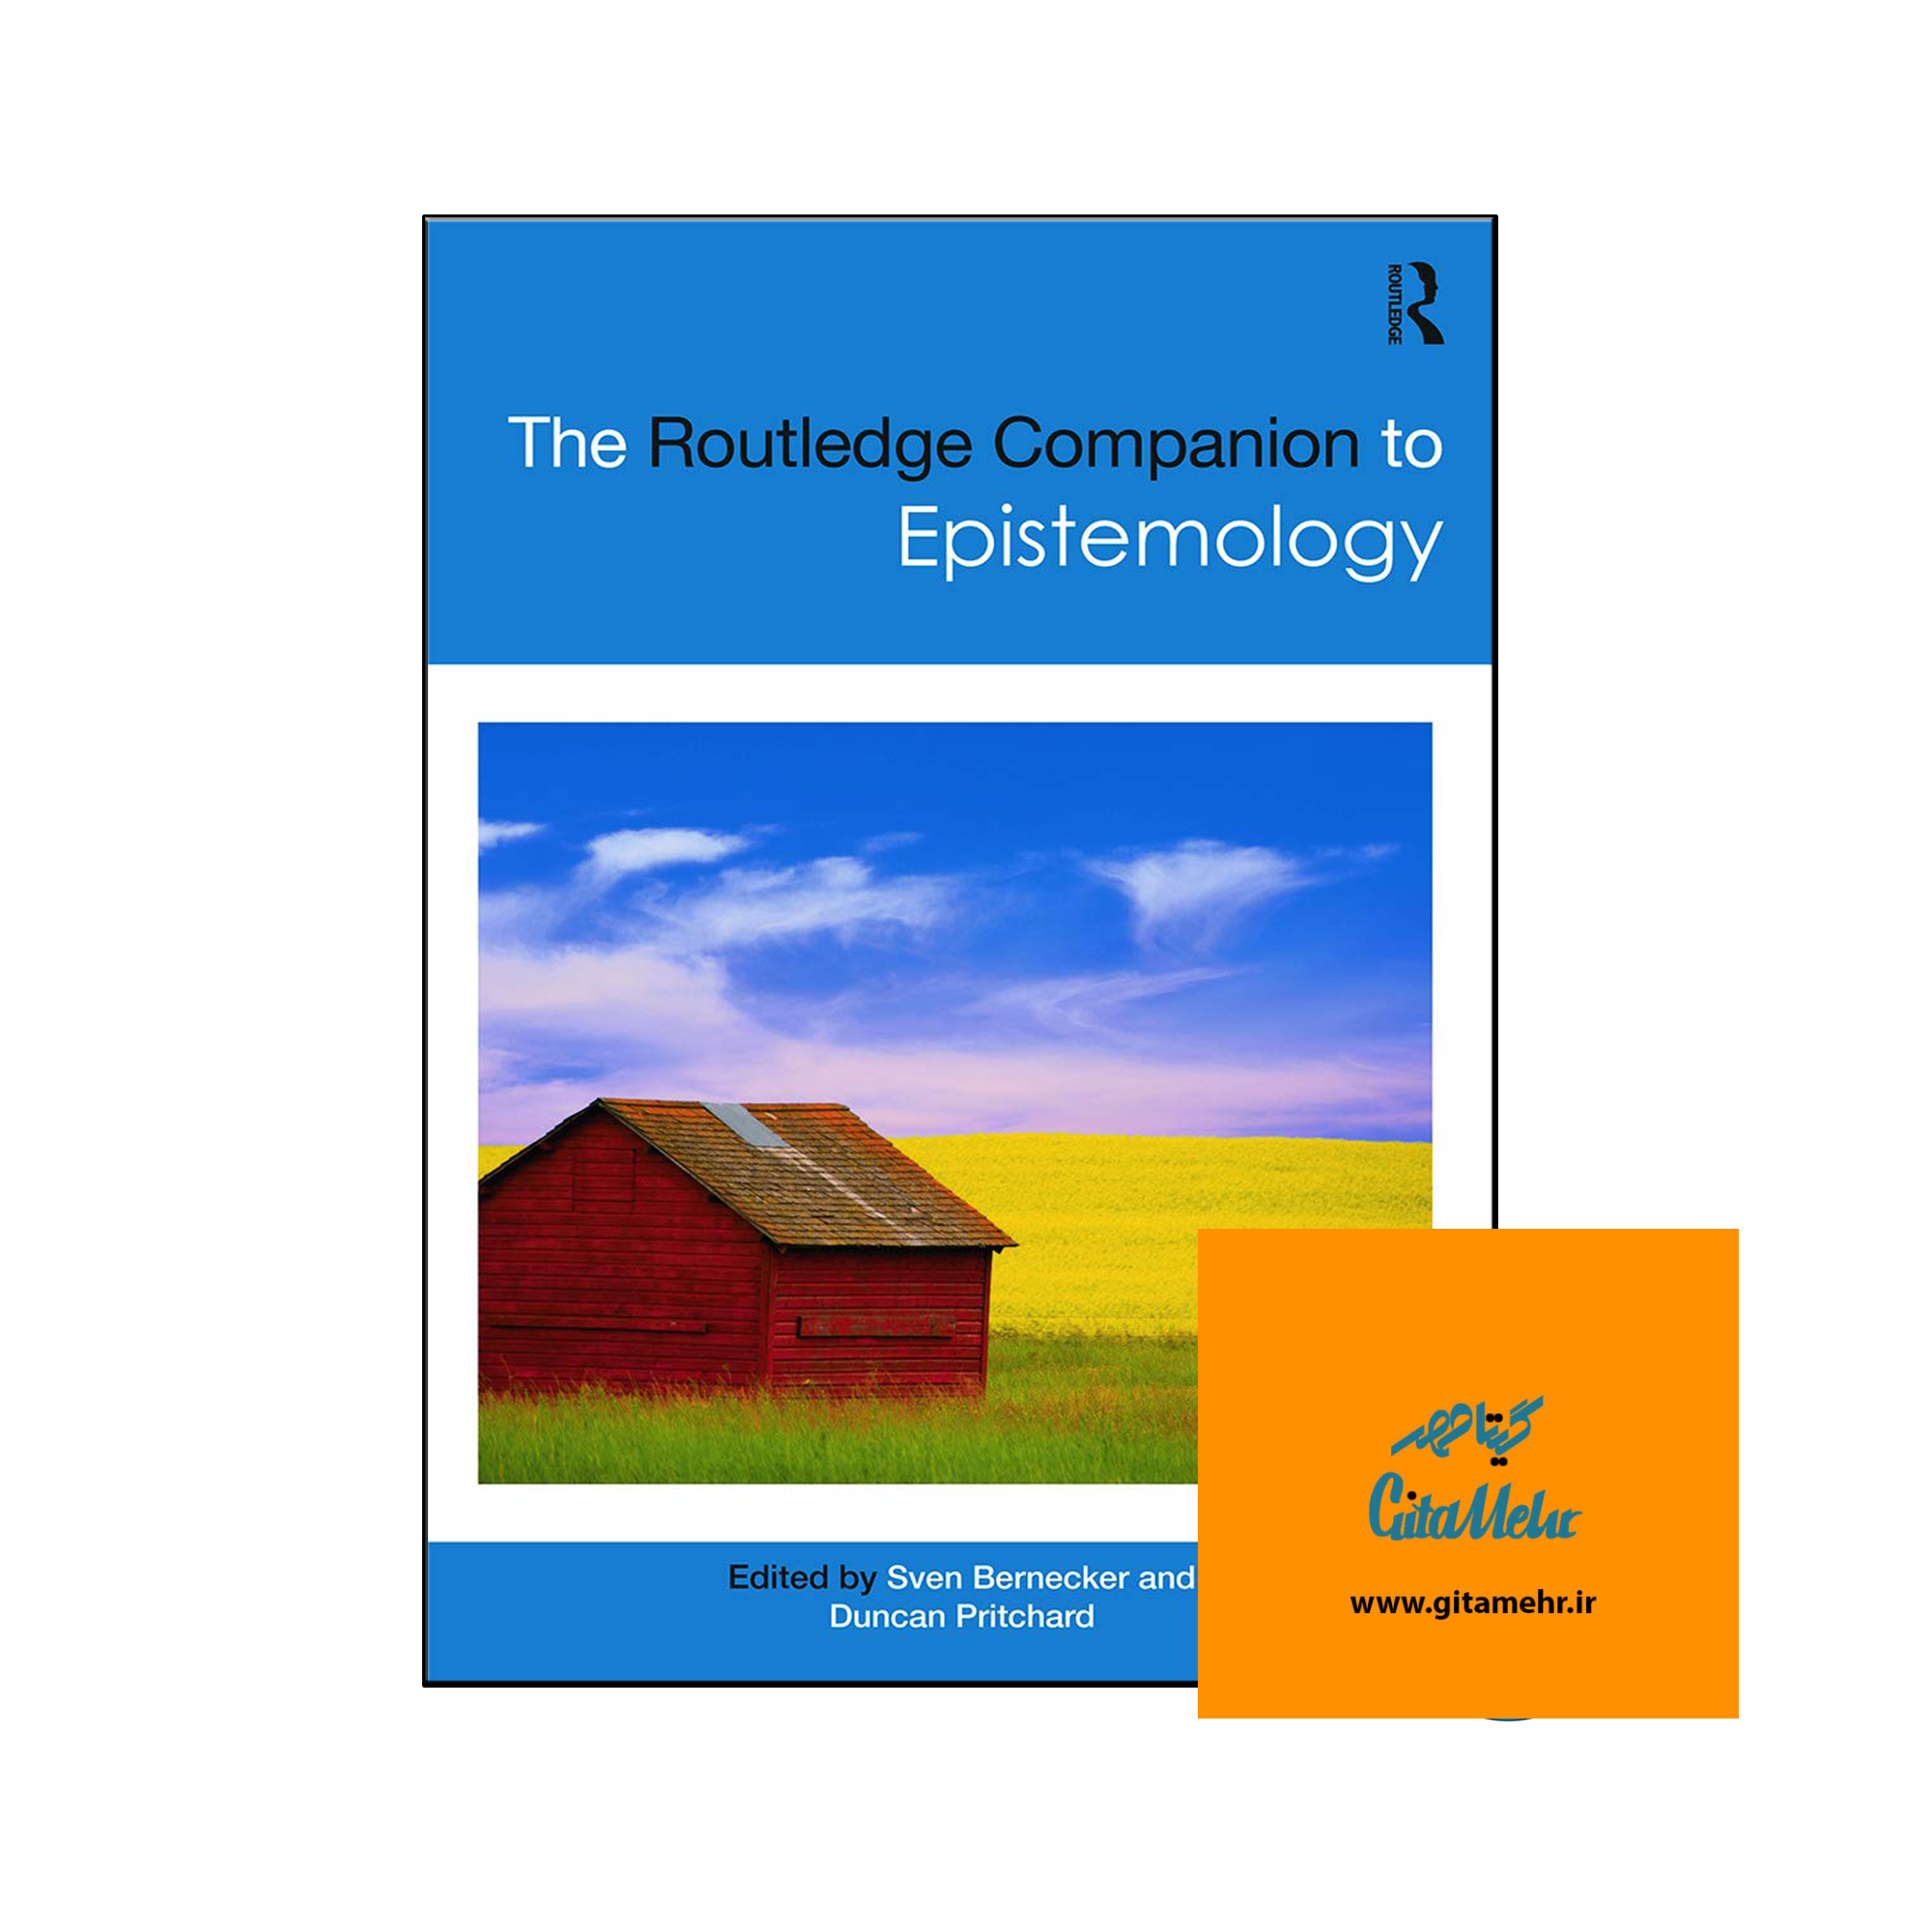 daa9d8aad8a7d8a8 the routledge companion to epistemology 65ecb6767ef3a